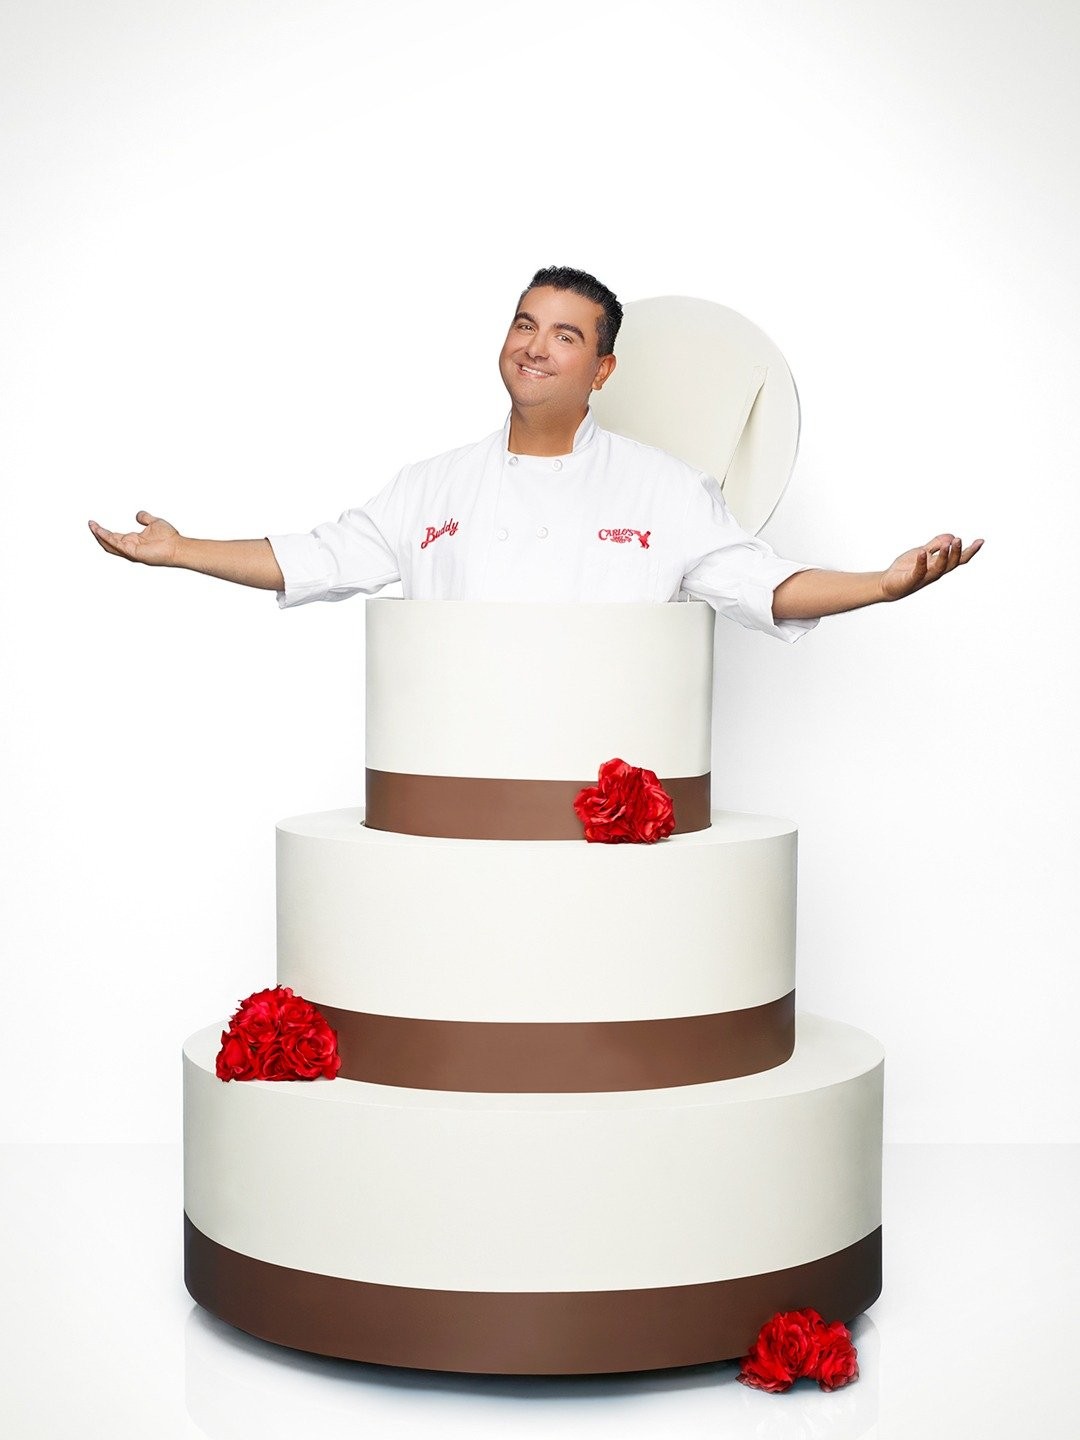 Buddy Valastro feared he 'wouldn't be the same person' after gruesome  injury but is 95% recovered | Daily Mail Online